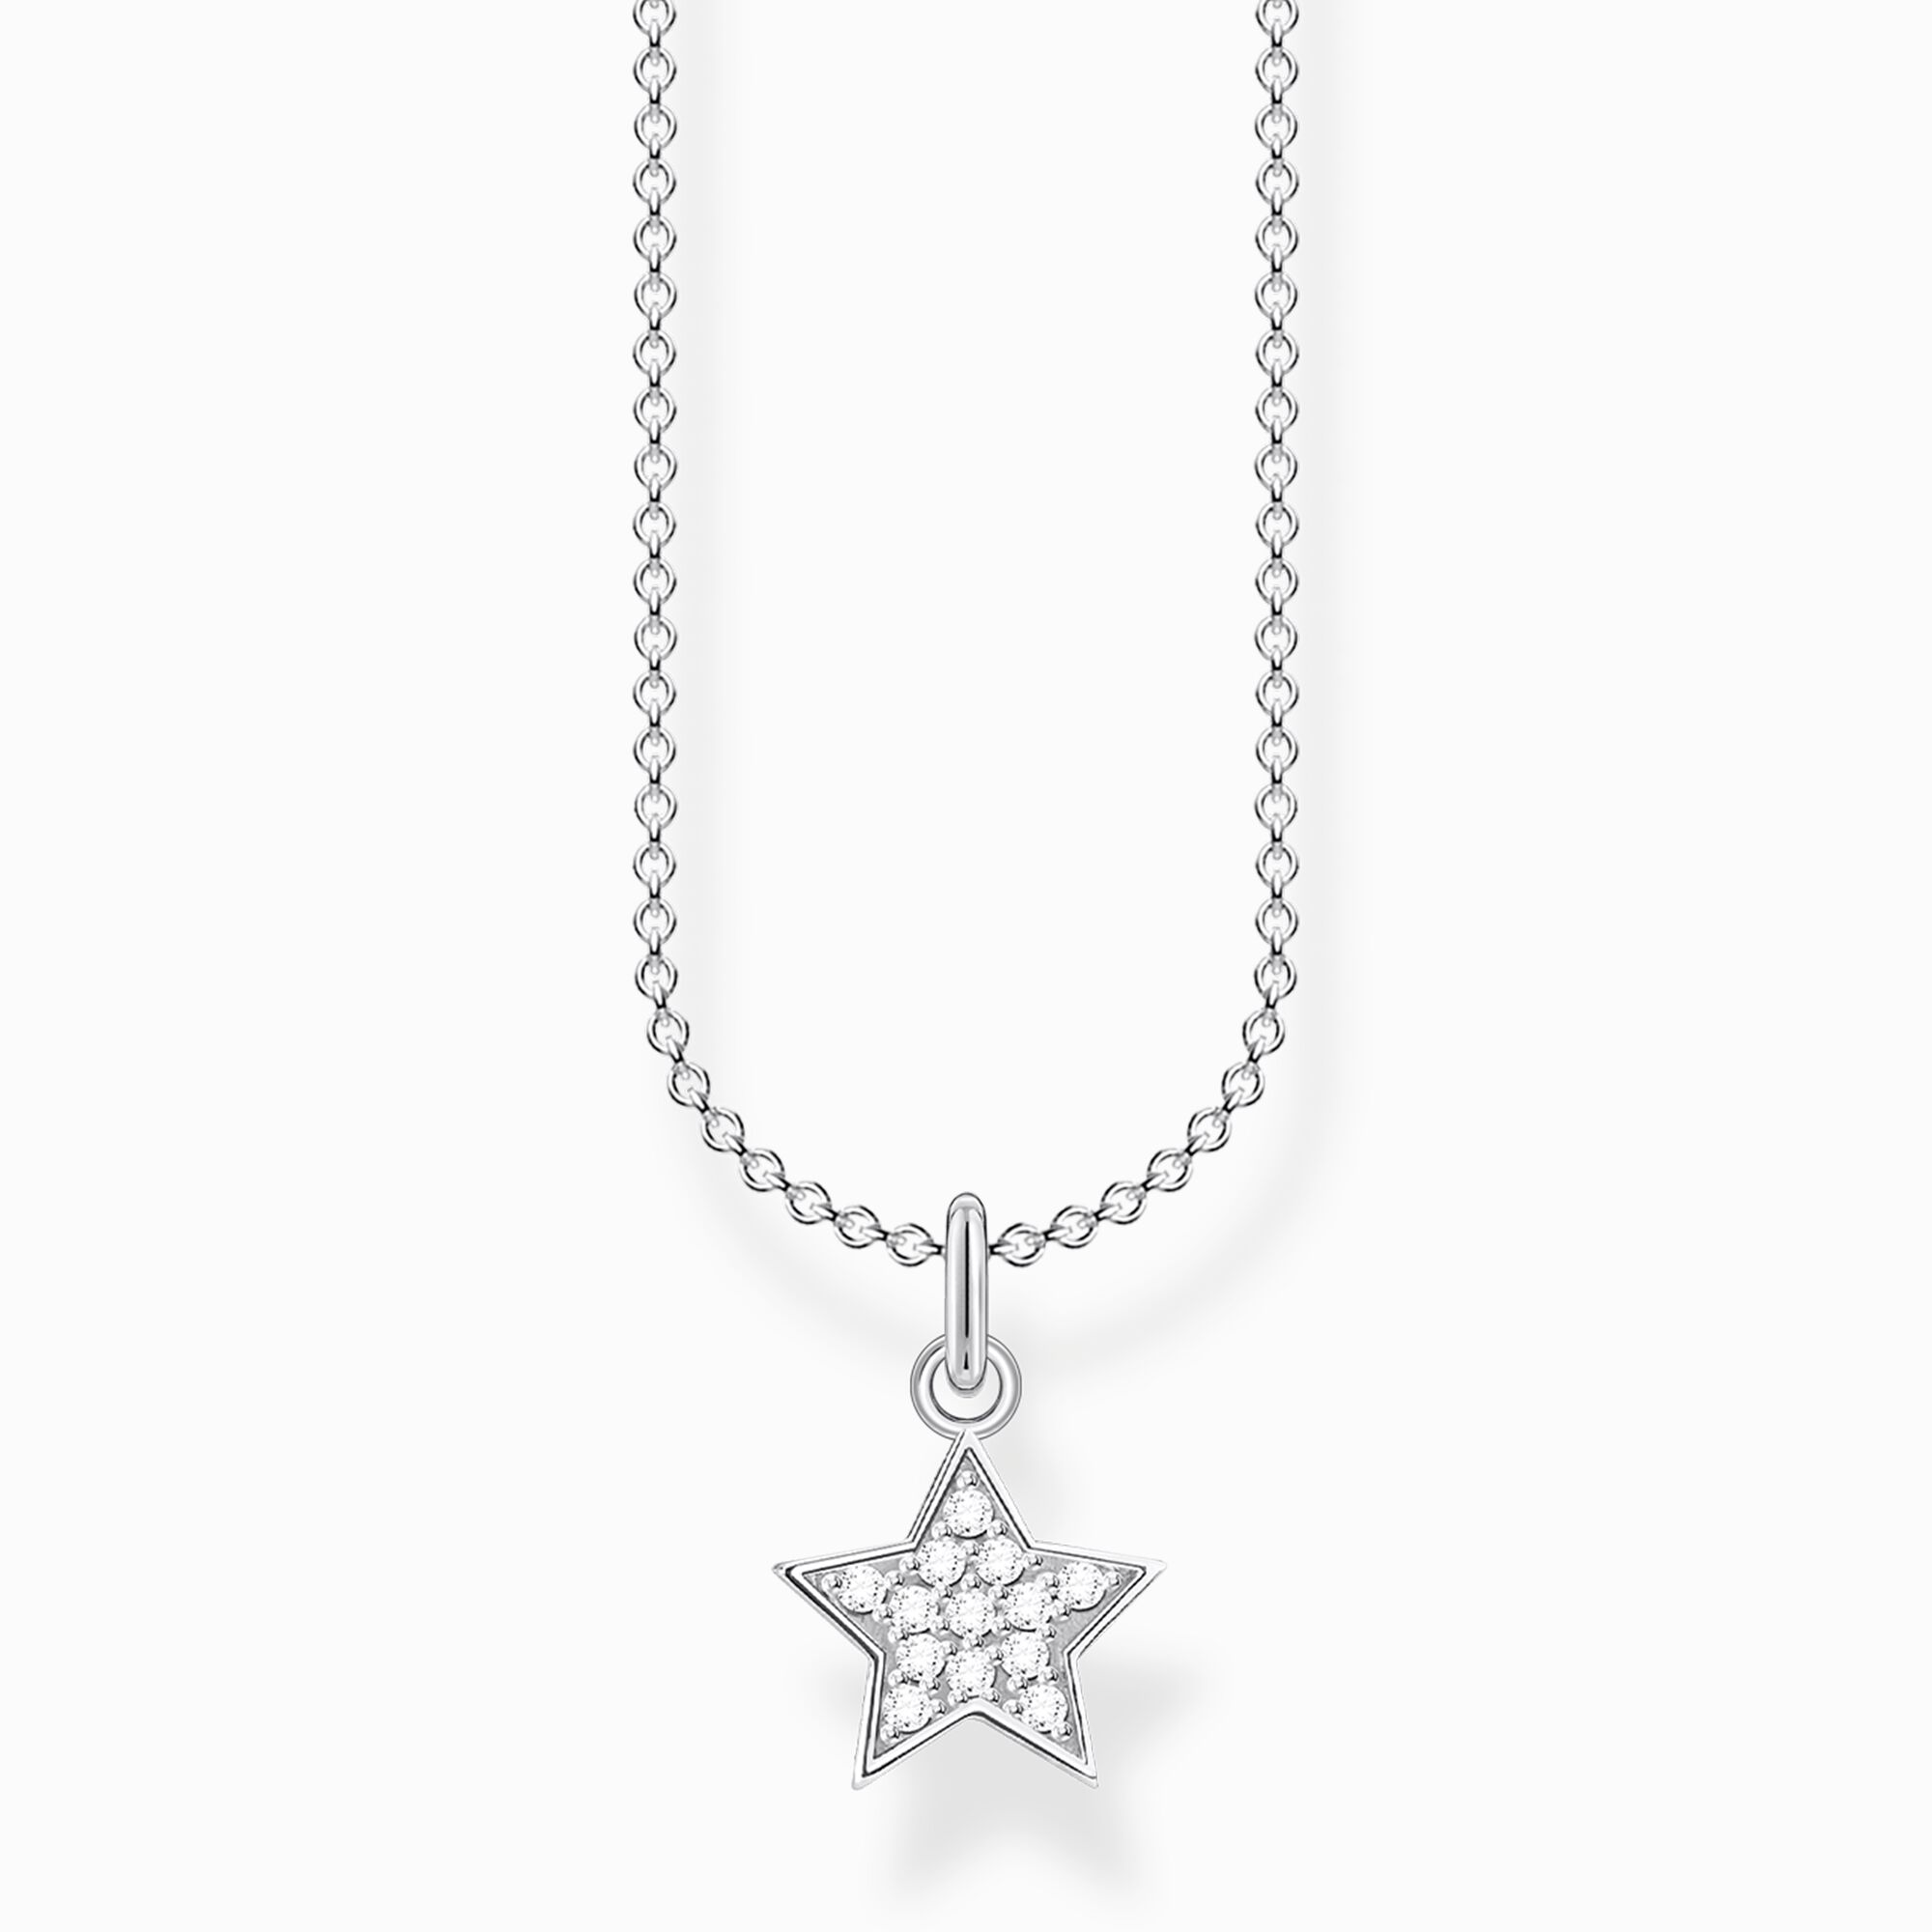 Necklace star pav&eacute; silver from the Charming Collection collection in the THOMAS SABO online store